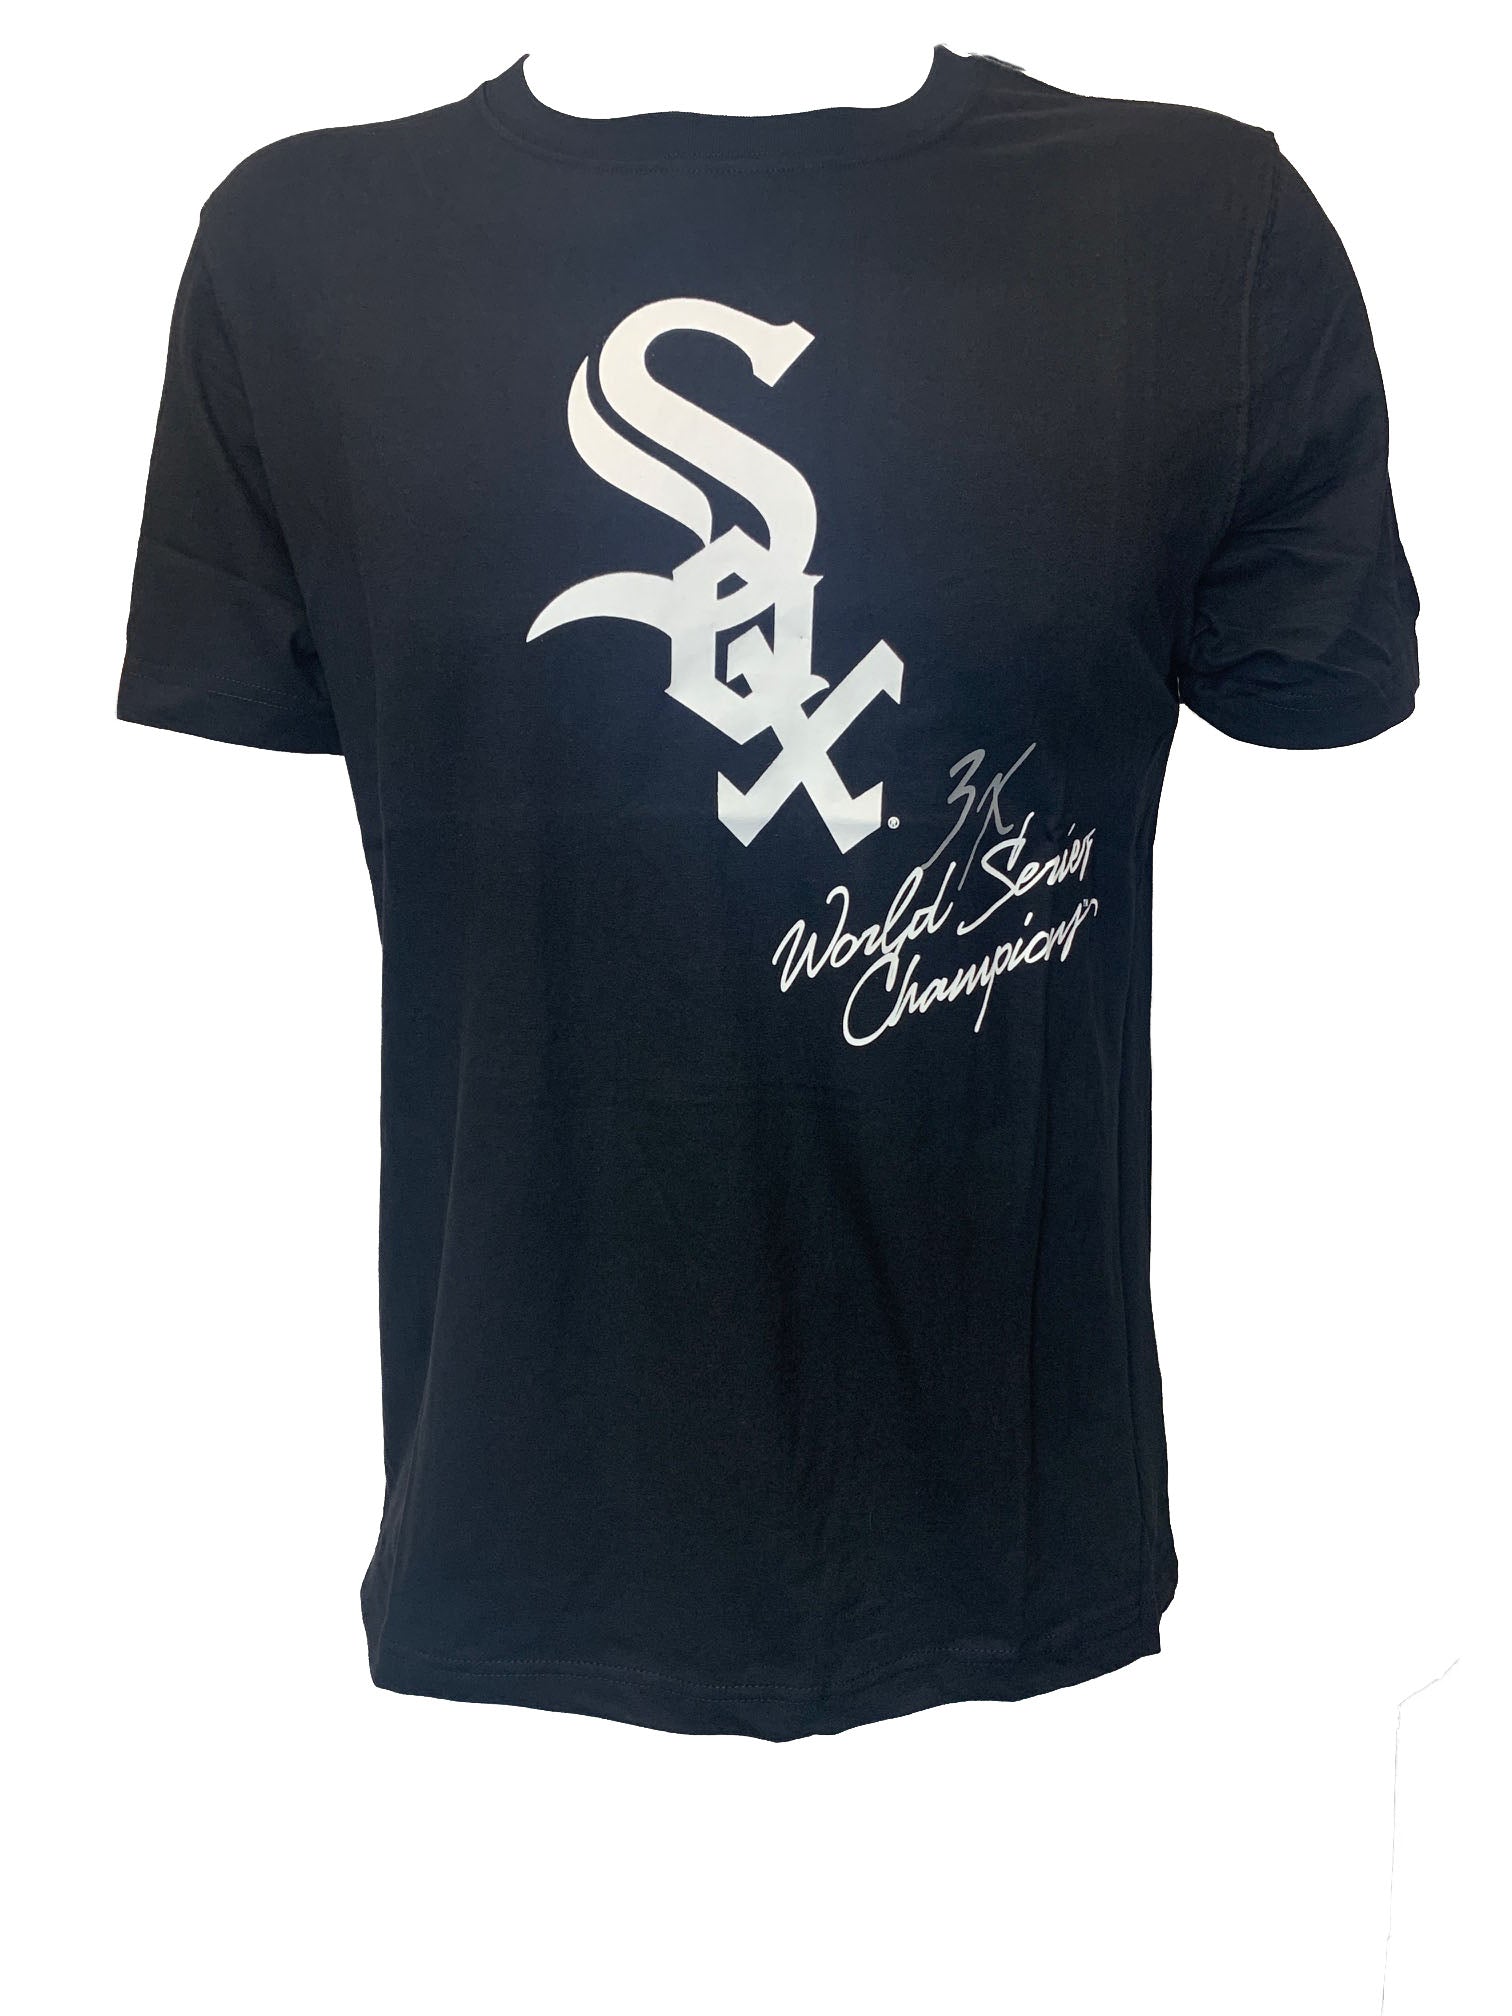 CHICAGO WHITE SOX WORLD CHAMPIONS TEE – JR'S SPORTS